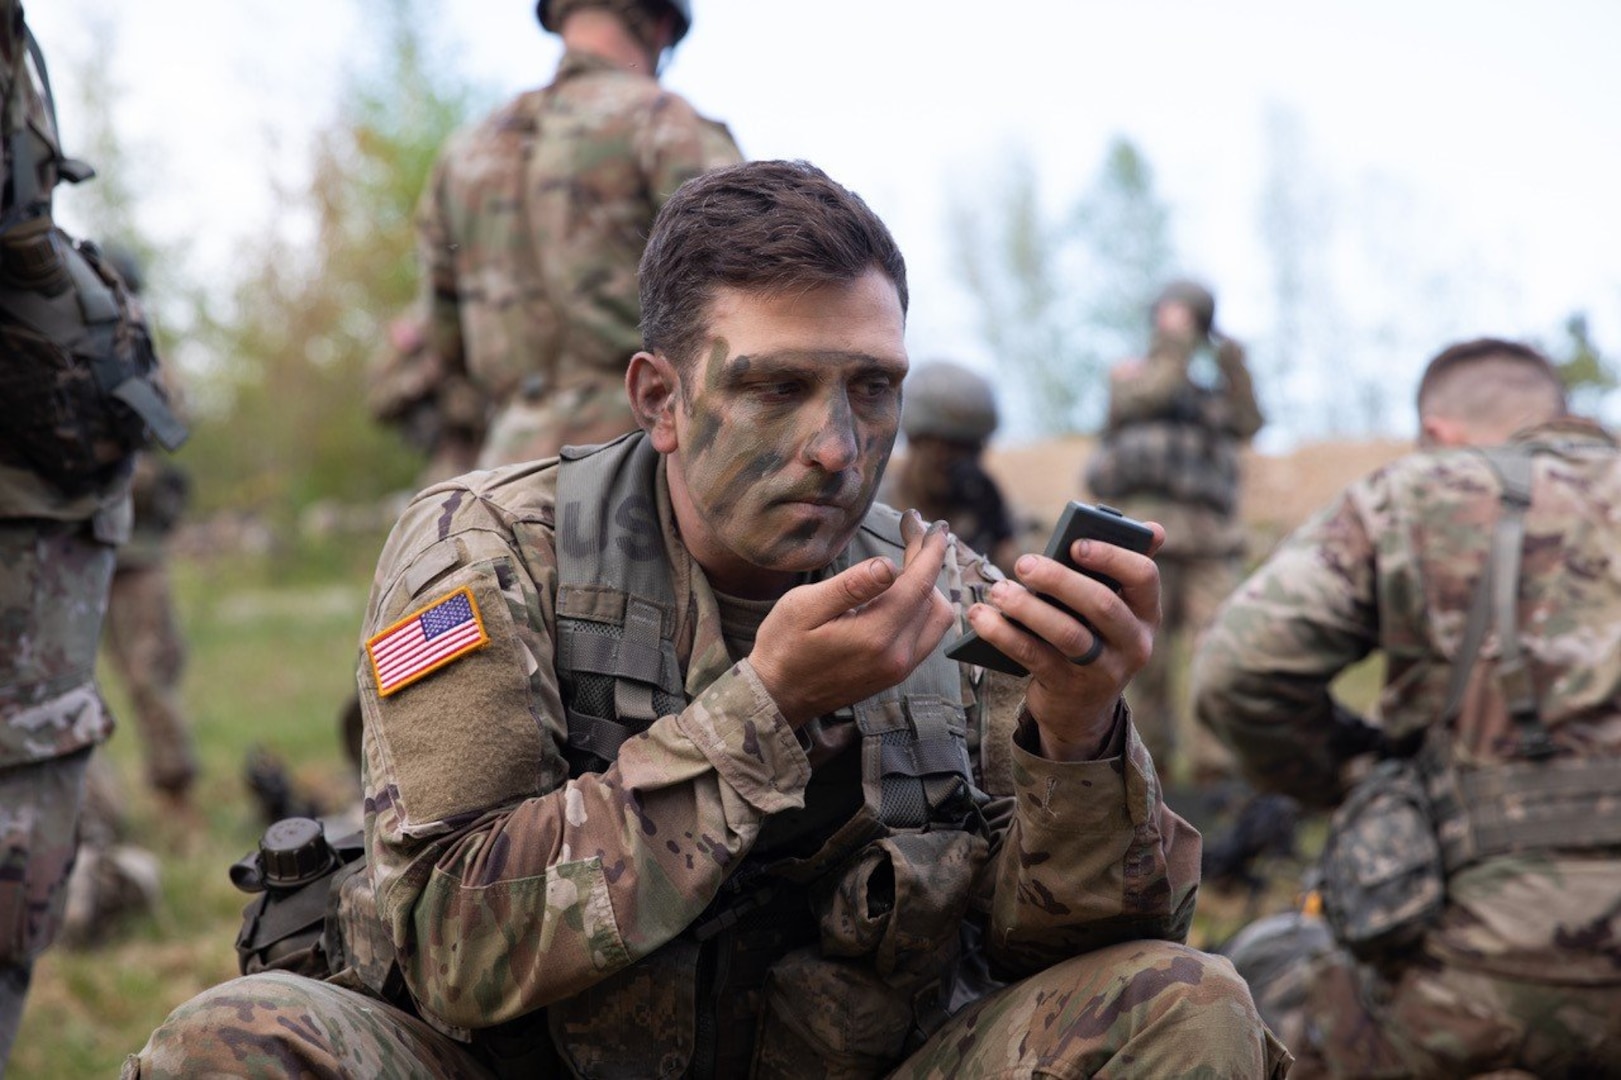 Officer Candidate Blake Costa of the Rhode Island Army National Guard applies face paint at the start of day two of the Region 1 Officer Candidate School Field Leadership Exercise on May 14, 2022, in Center Strafford, N.H.